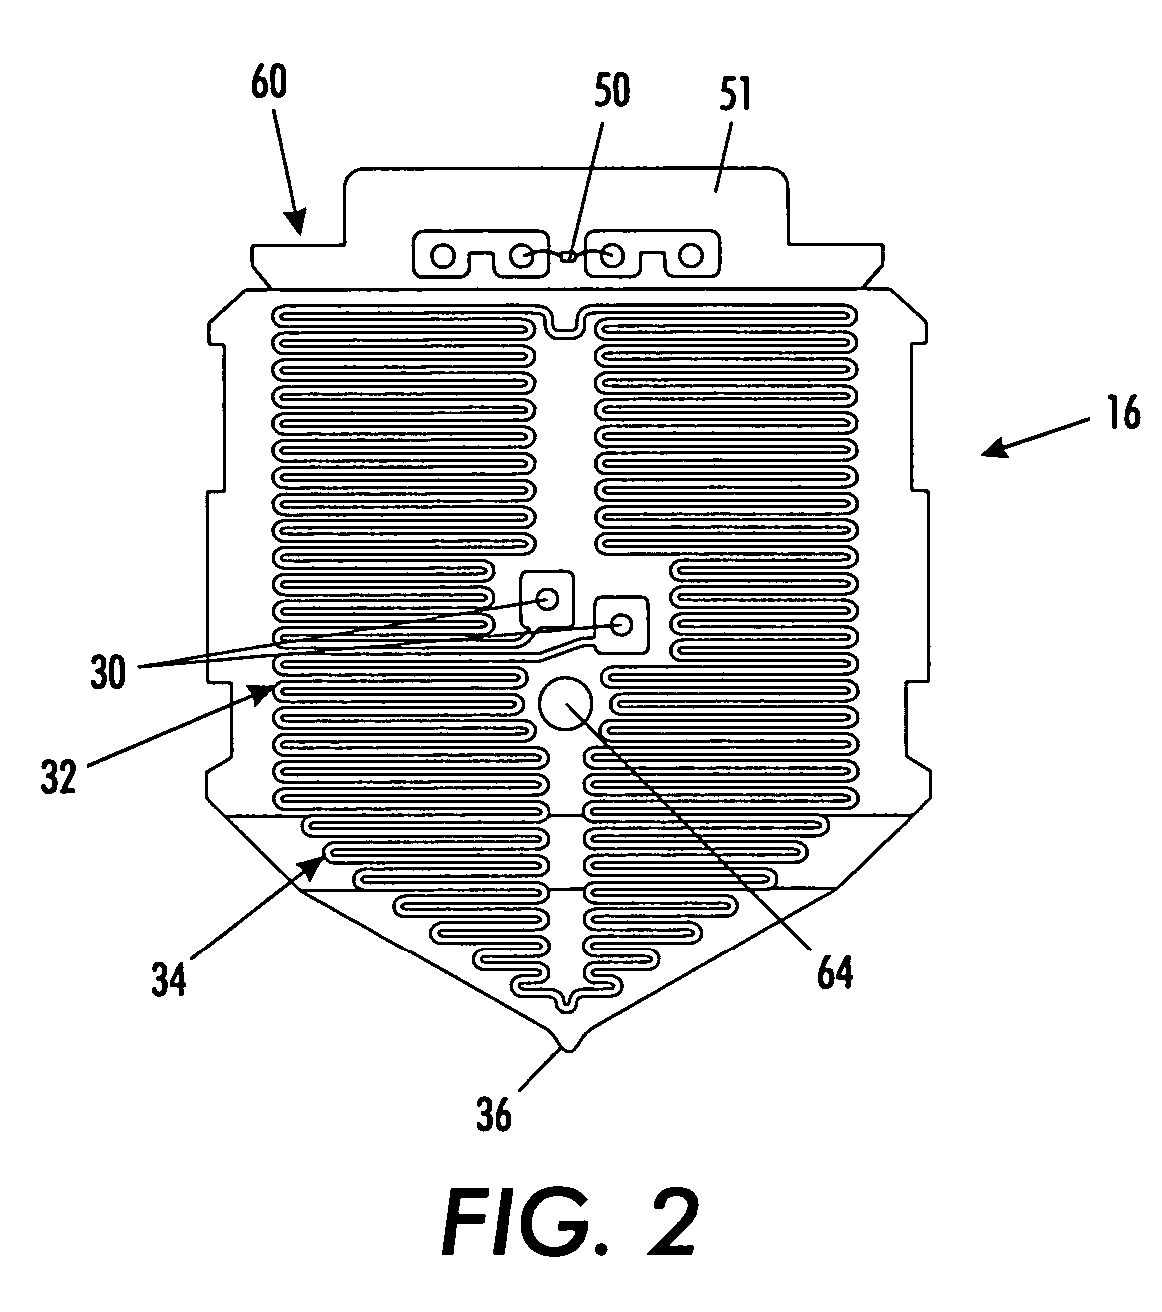 Ink delivery and printing method for phasing printing systems